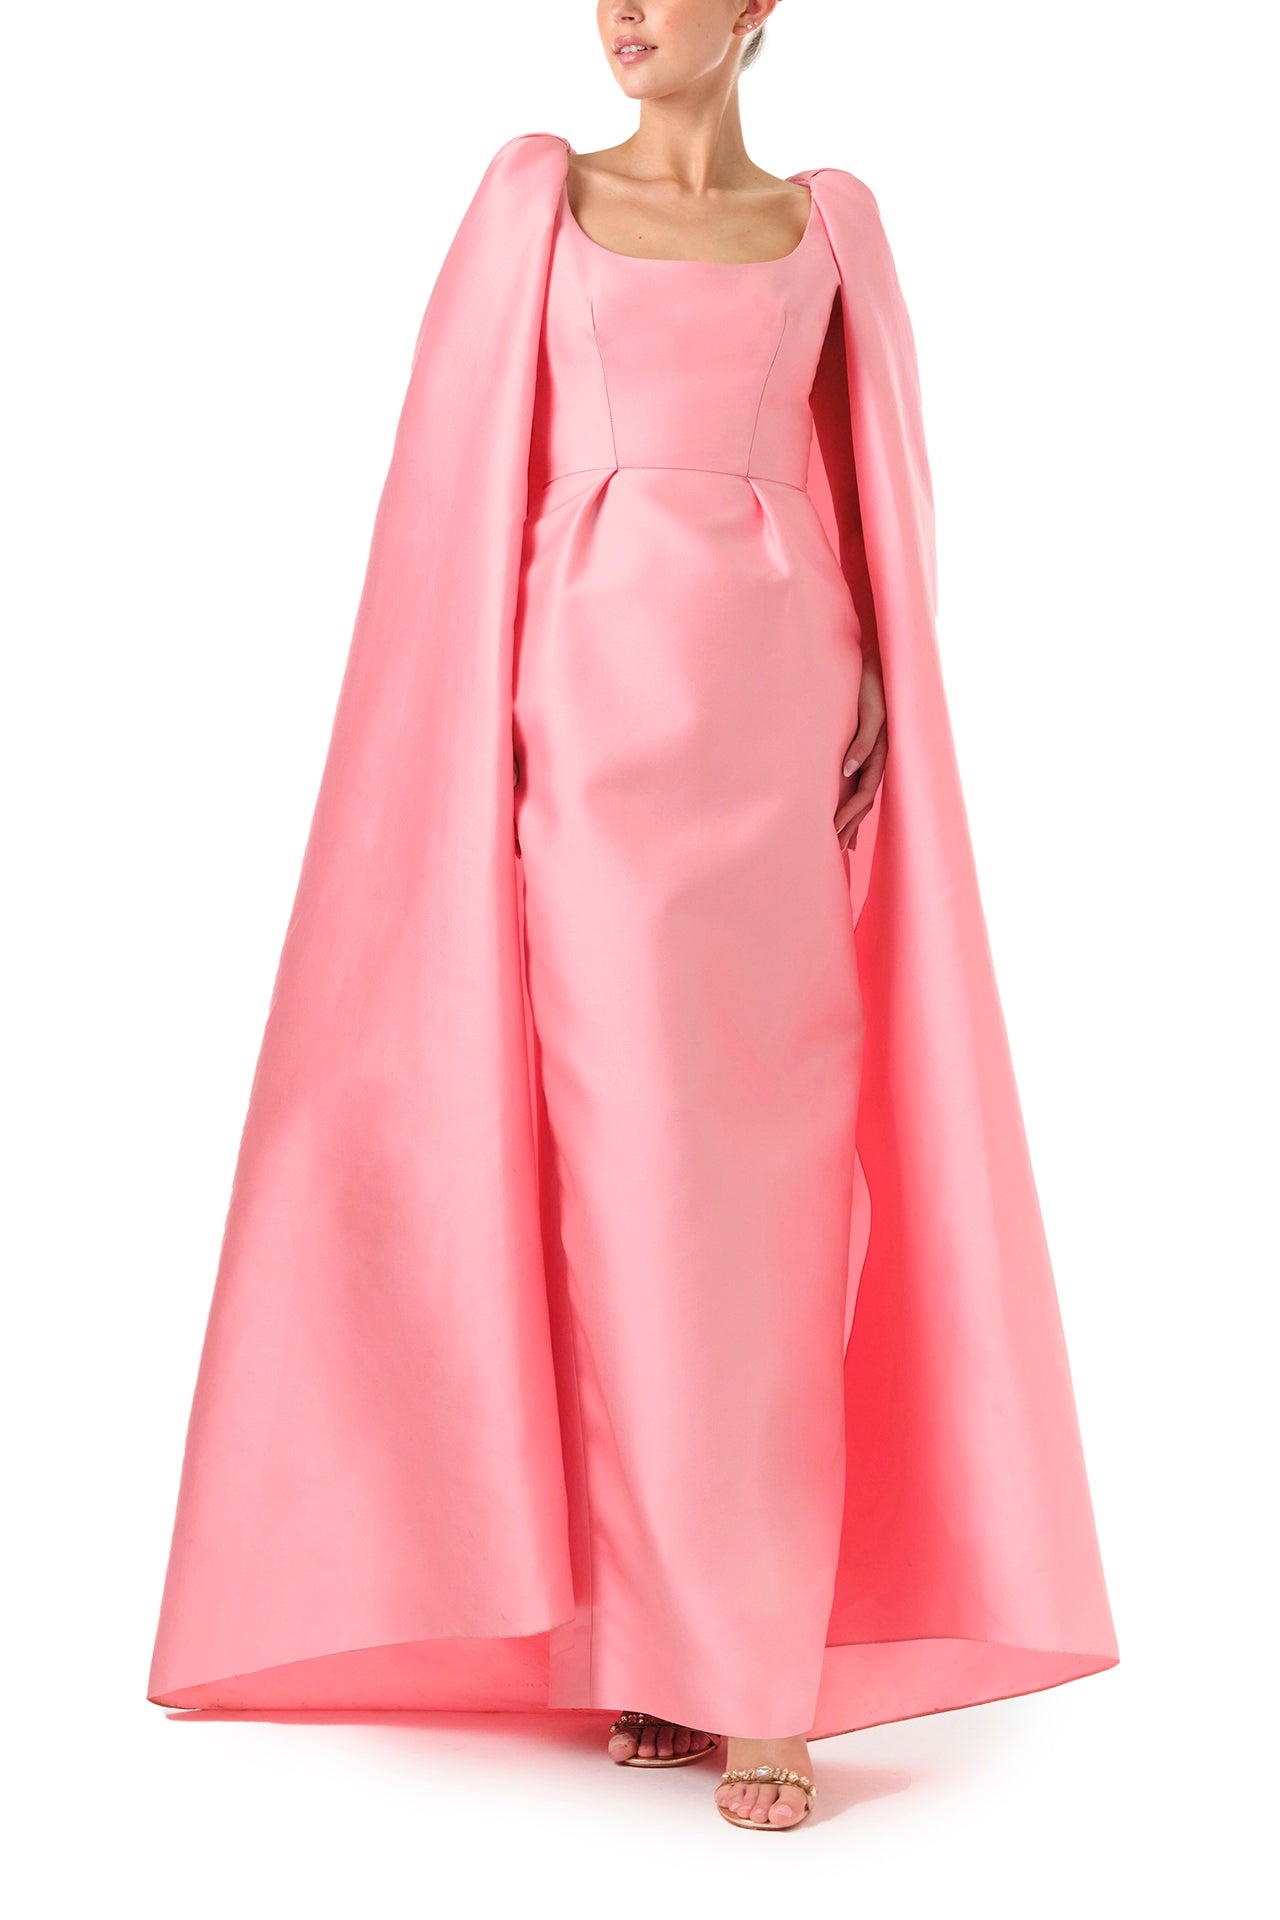 Monique Lhuillier Fall 2024 Dahlia pink mikado, sleeveless column gown with scoop neckline and attached cape - front two.